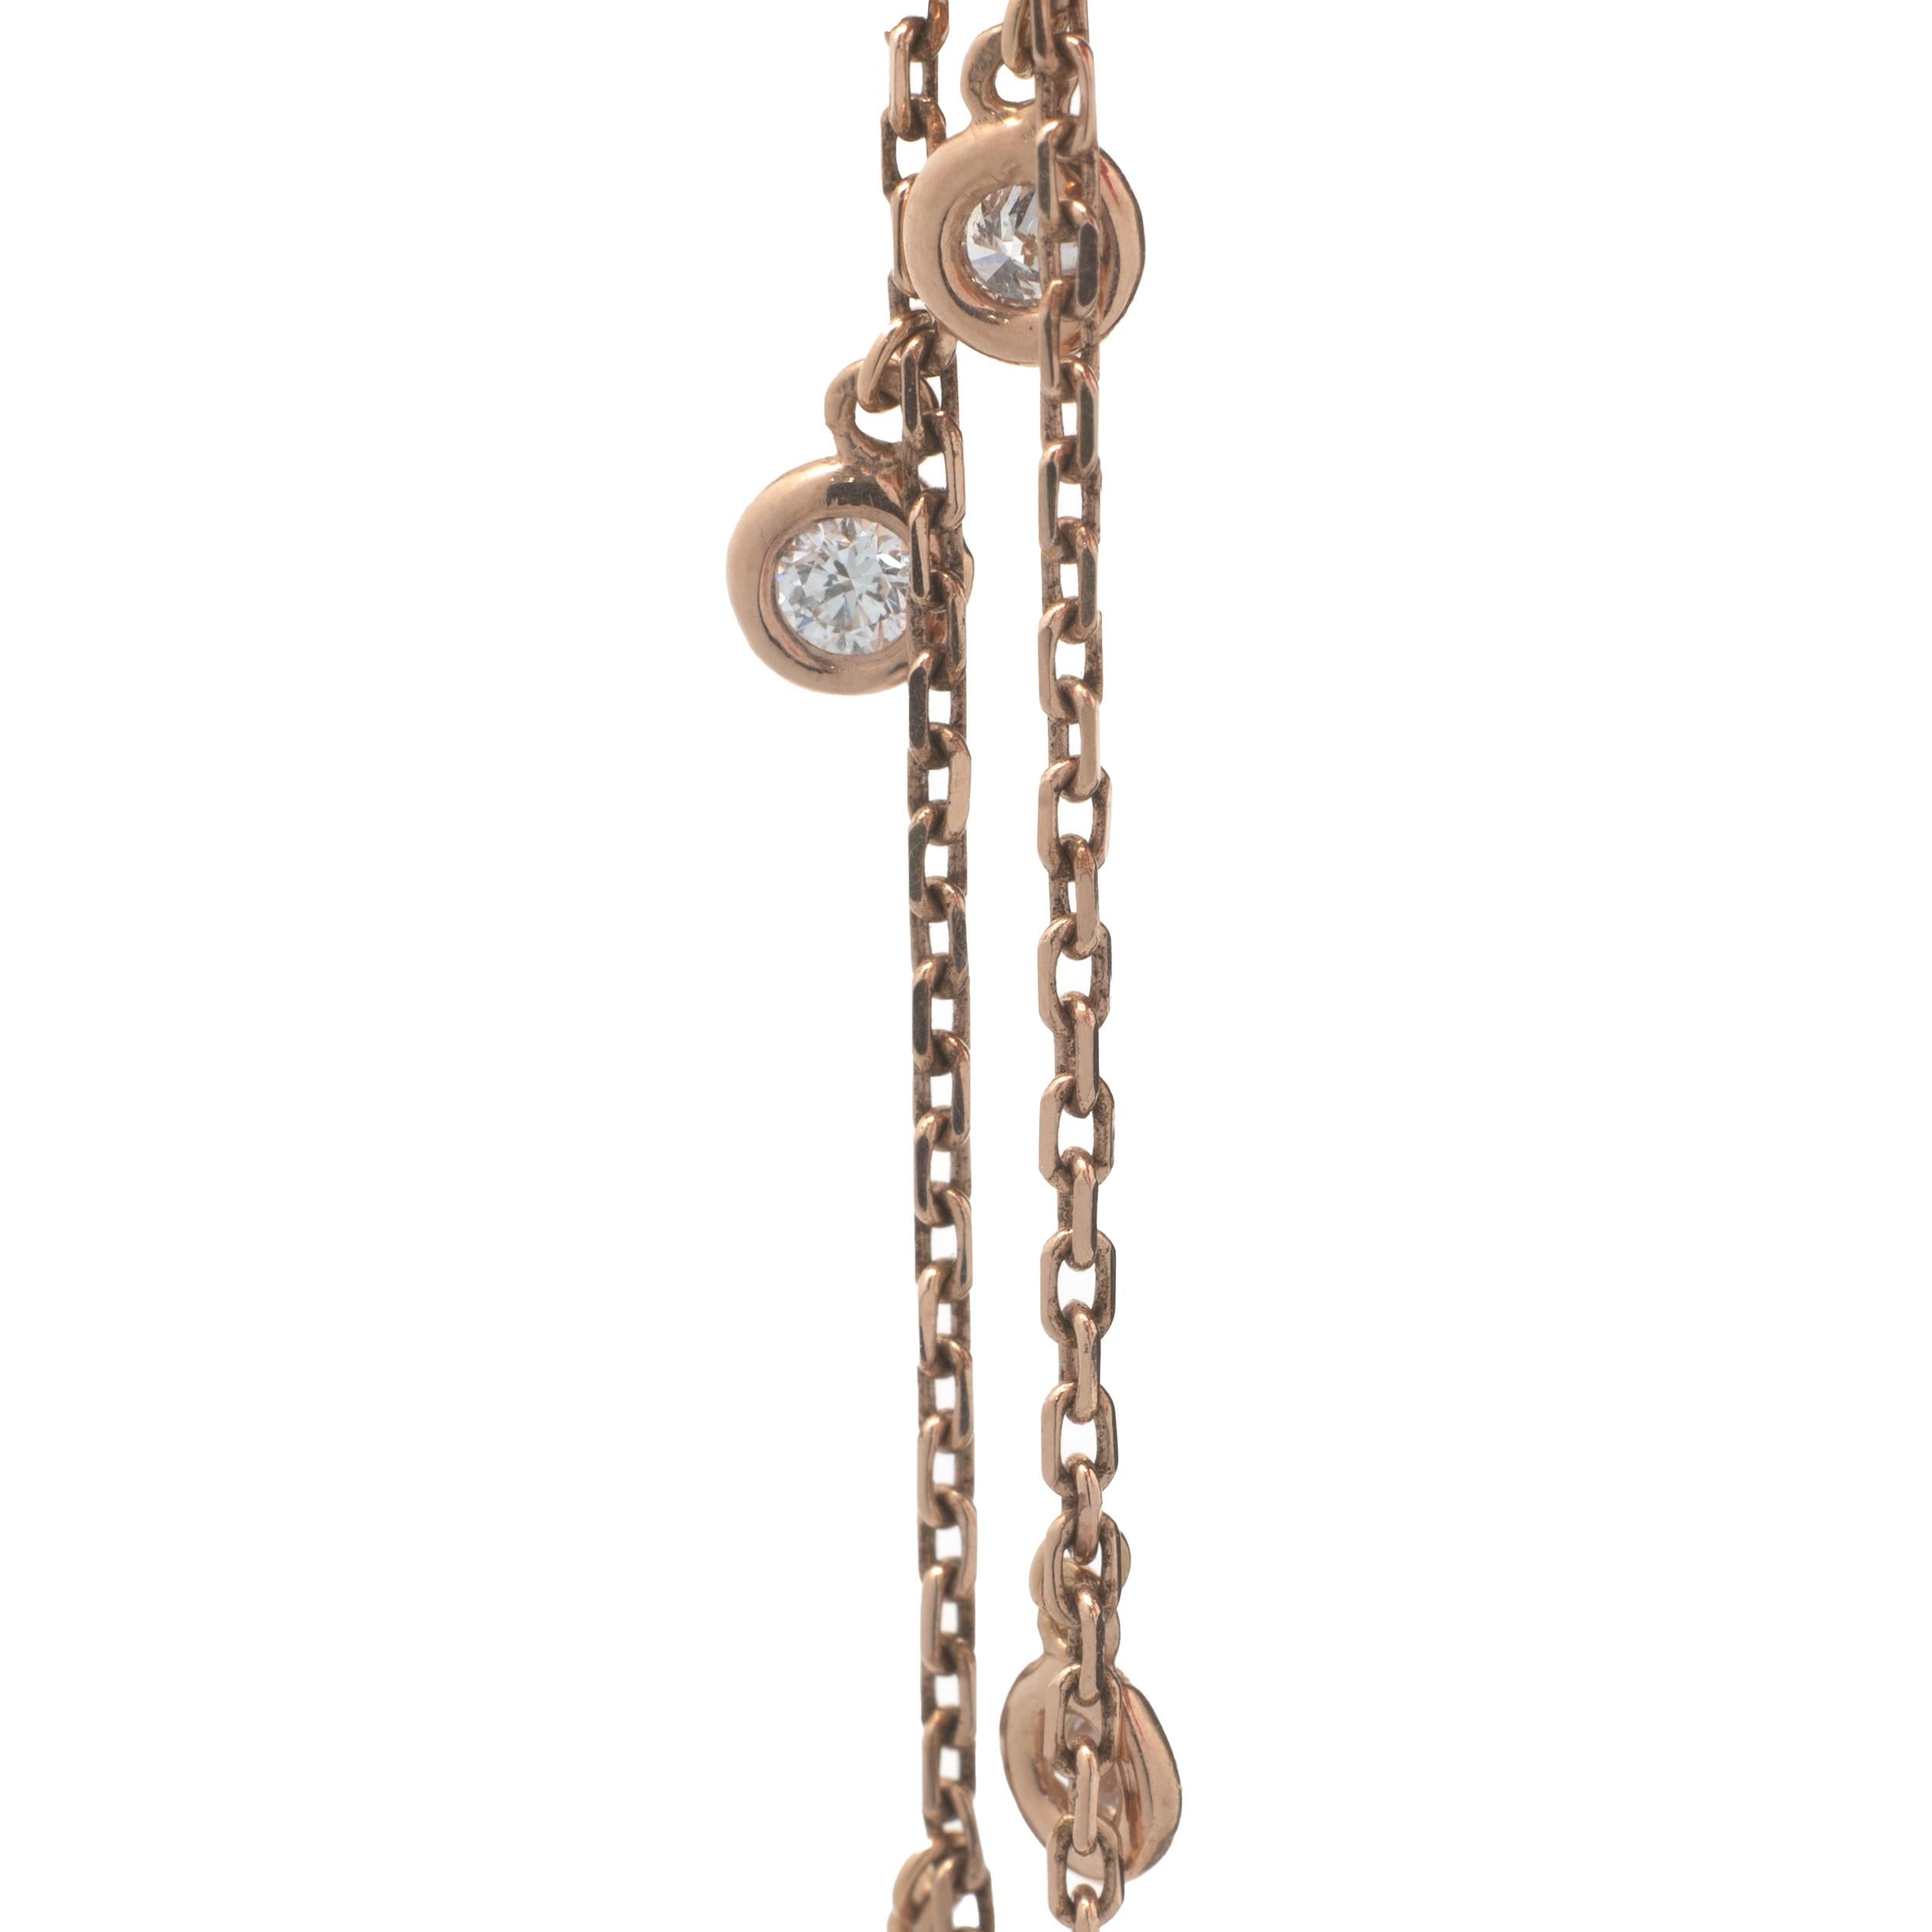 Designer: custom 
Material: 14k rose gold
Diamonds:  7 round cuts= 0.32cttw
Color: H
Clarity: SI1
Dimensions: necklace measures 17.50-inches in length
Weight: 3.06 grams
